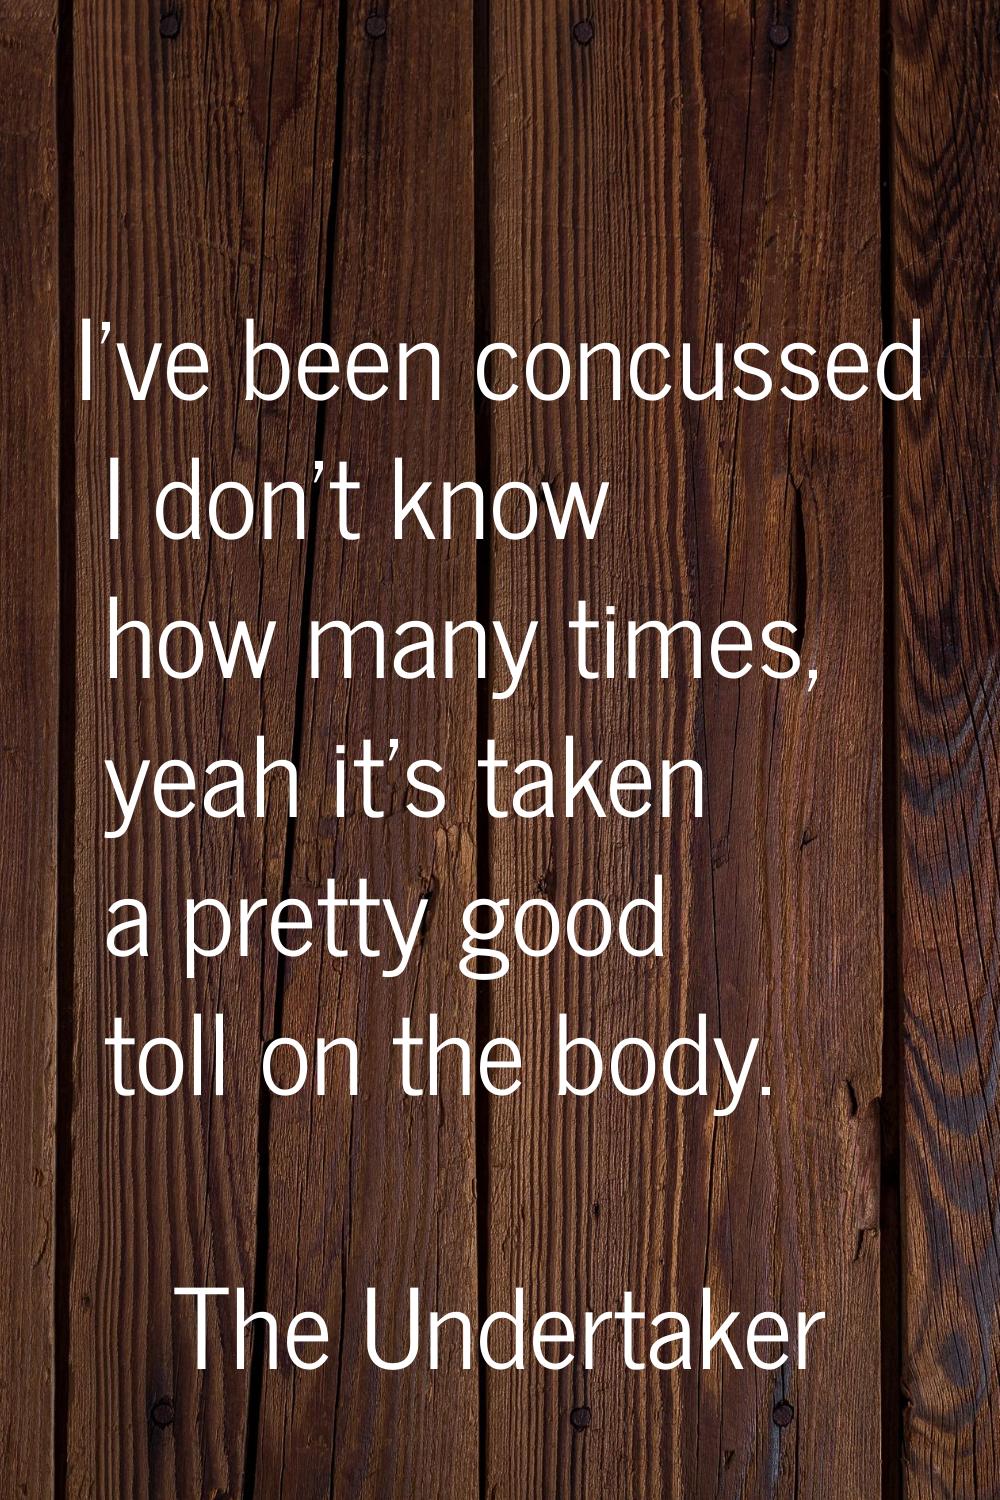 I've been concussed I don't know how many times, yeah it's taken a pretty good toll on the body.